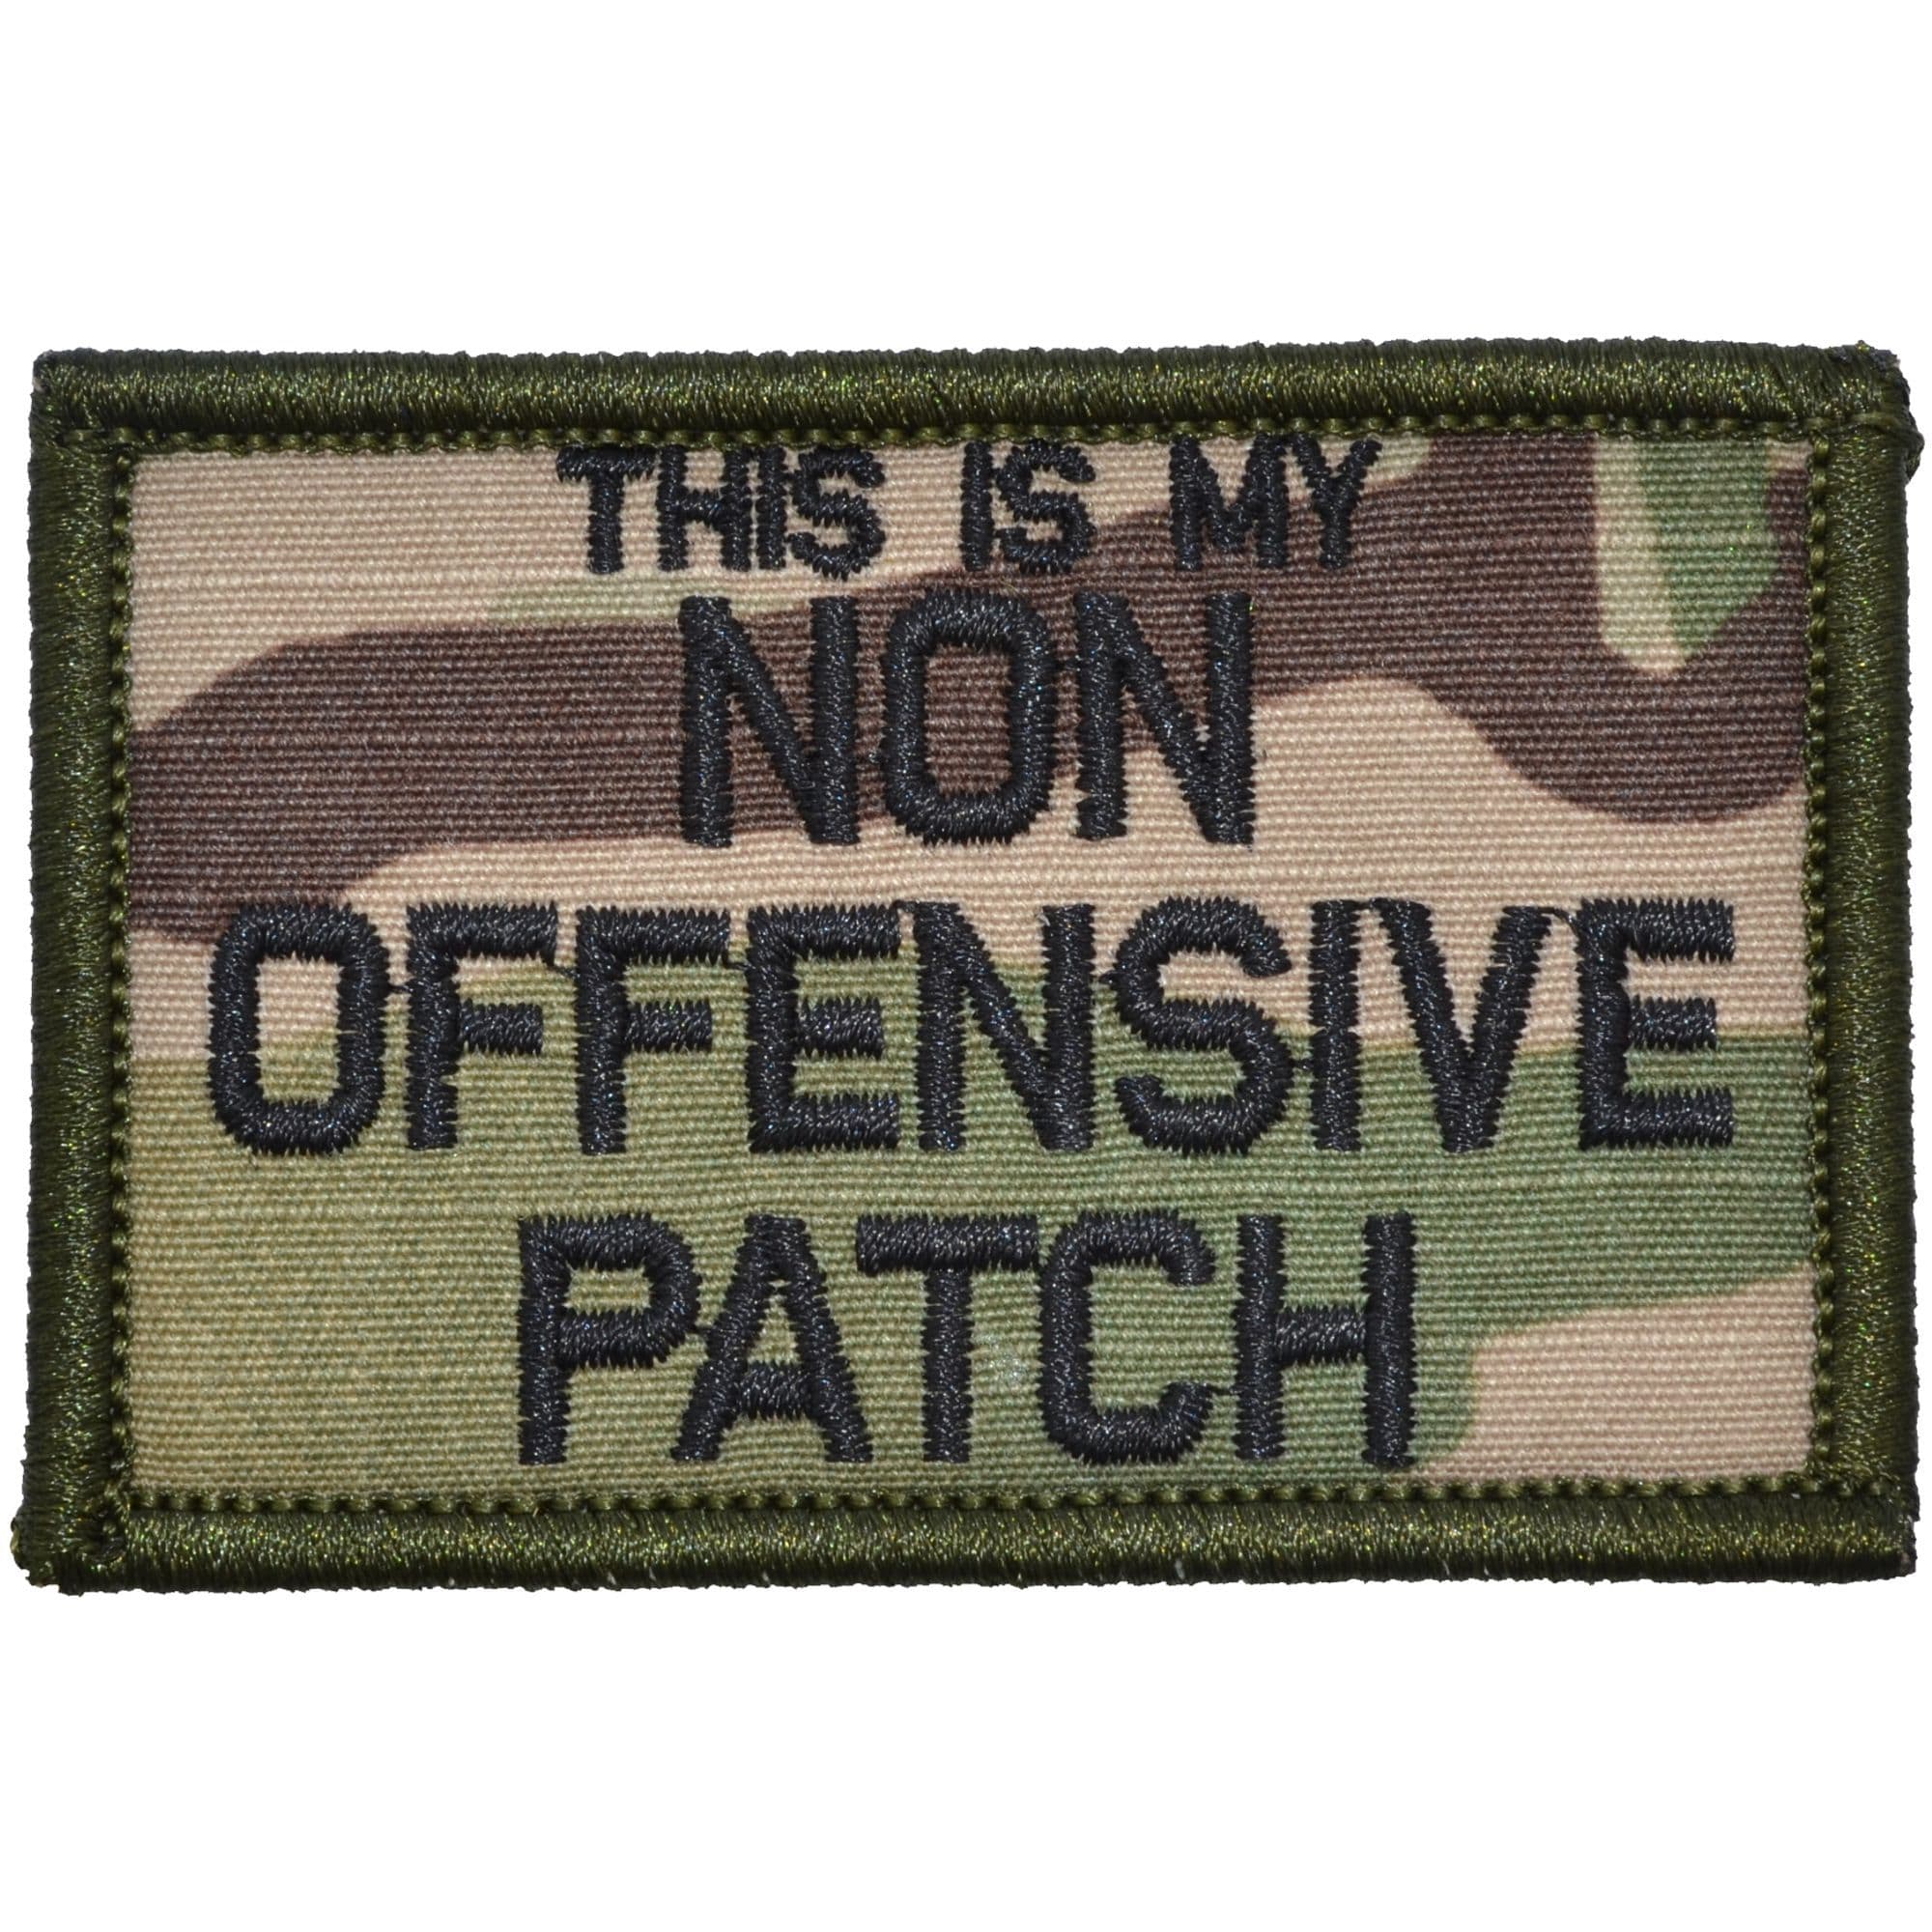 Tactical Gear Junkie Patches MultiCam This Is My Non Offensive Patch - 2x3 Patch